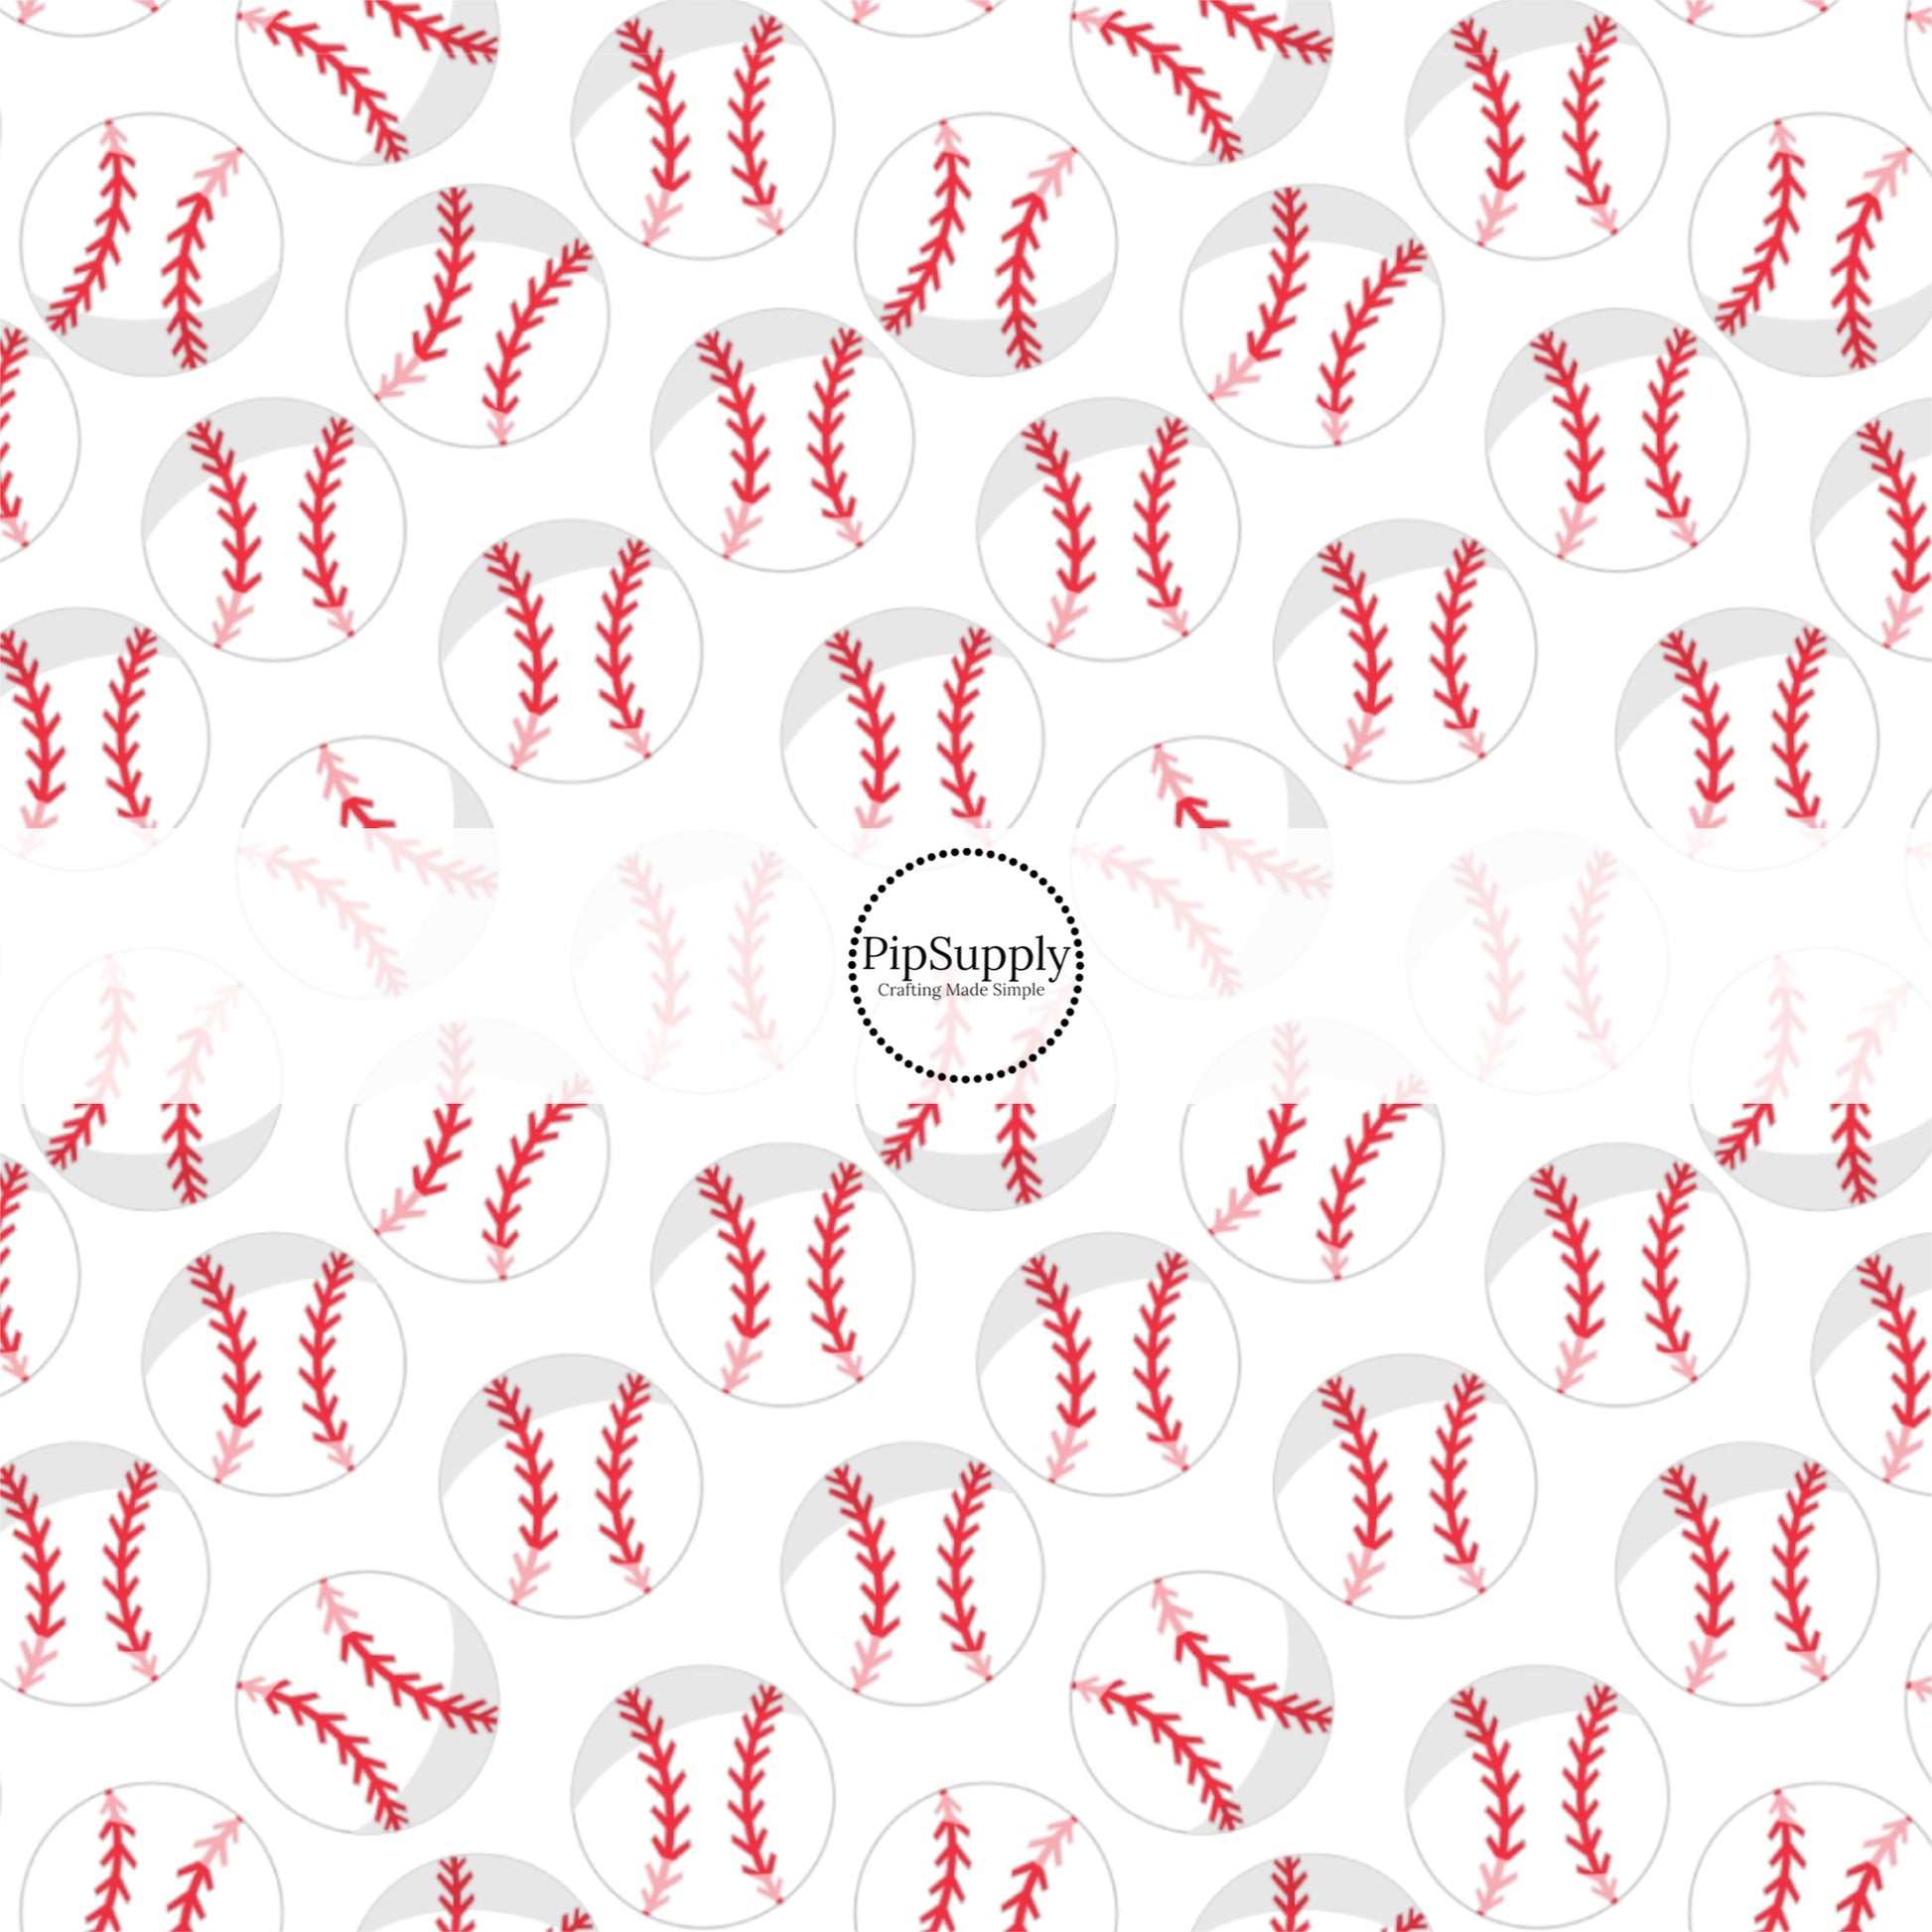 Red and white baseballs on white bow strips